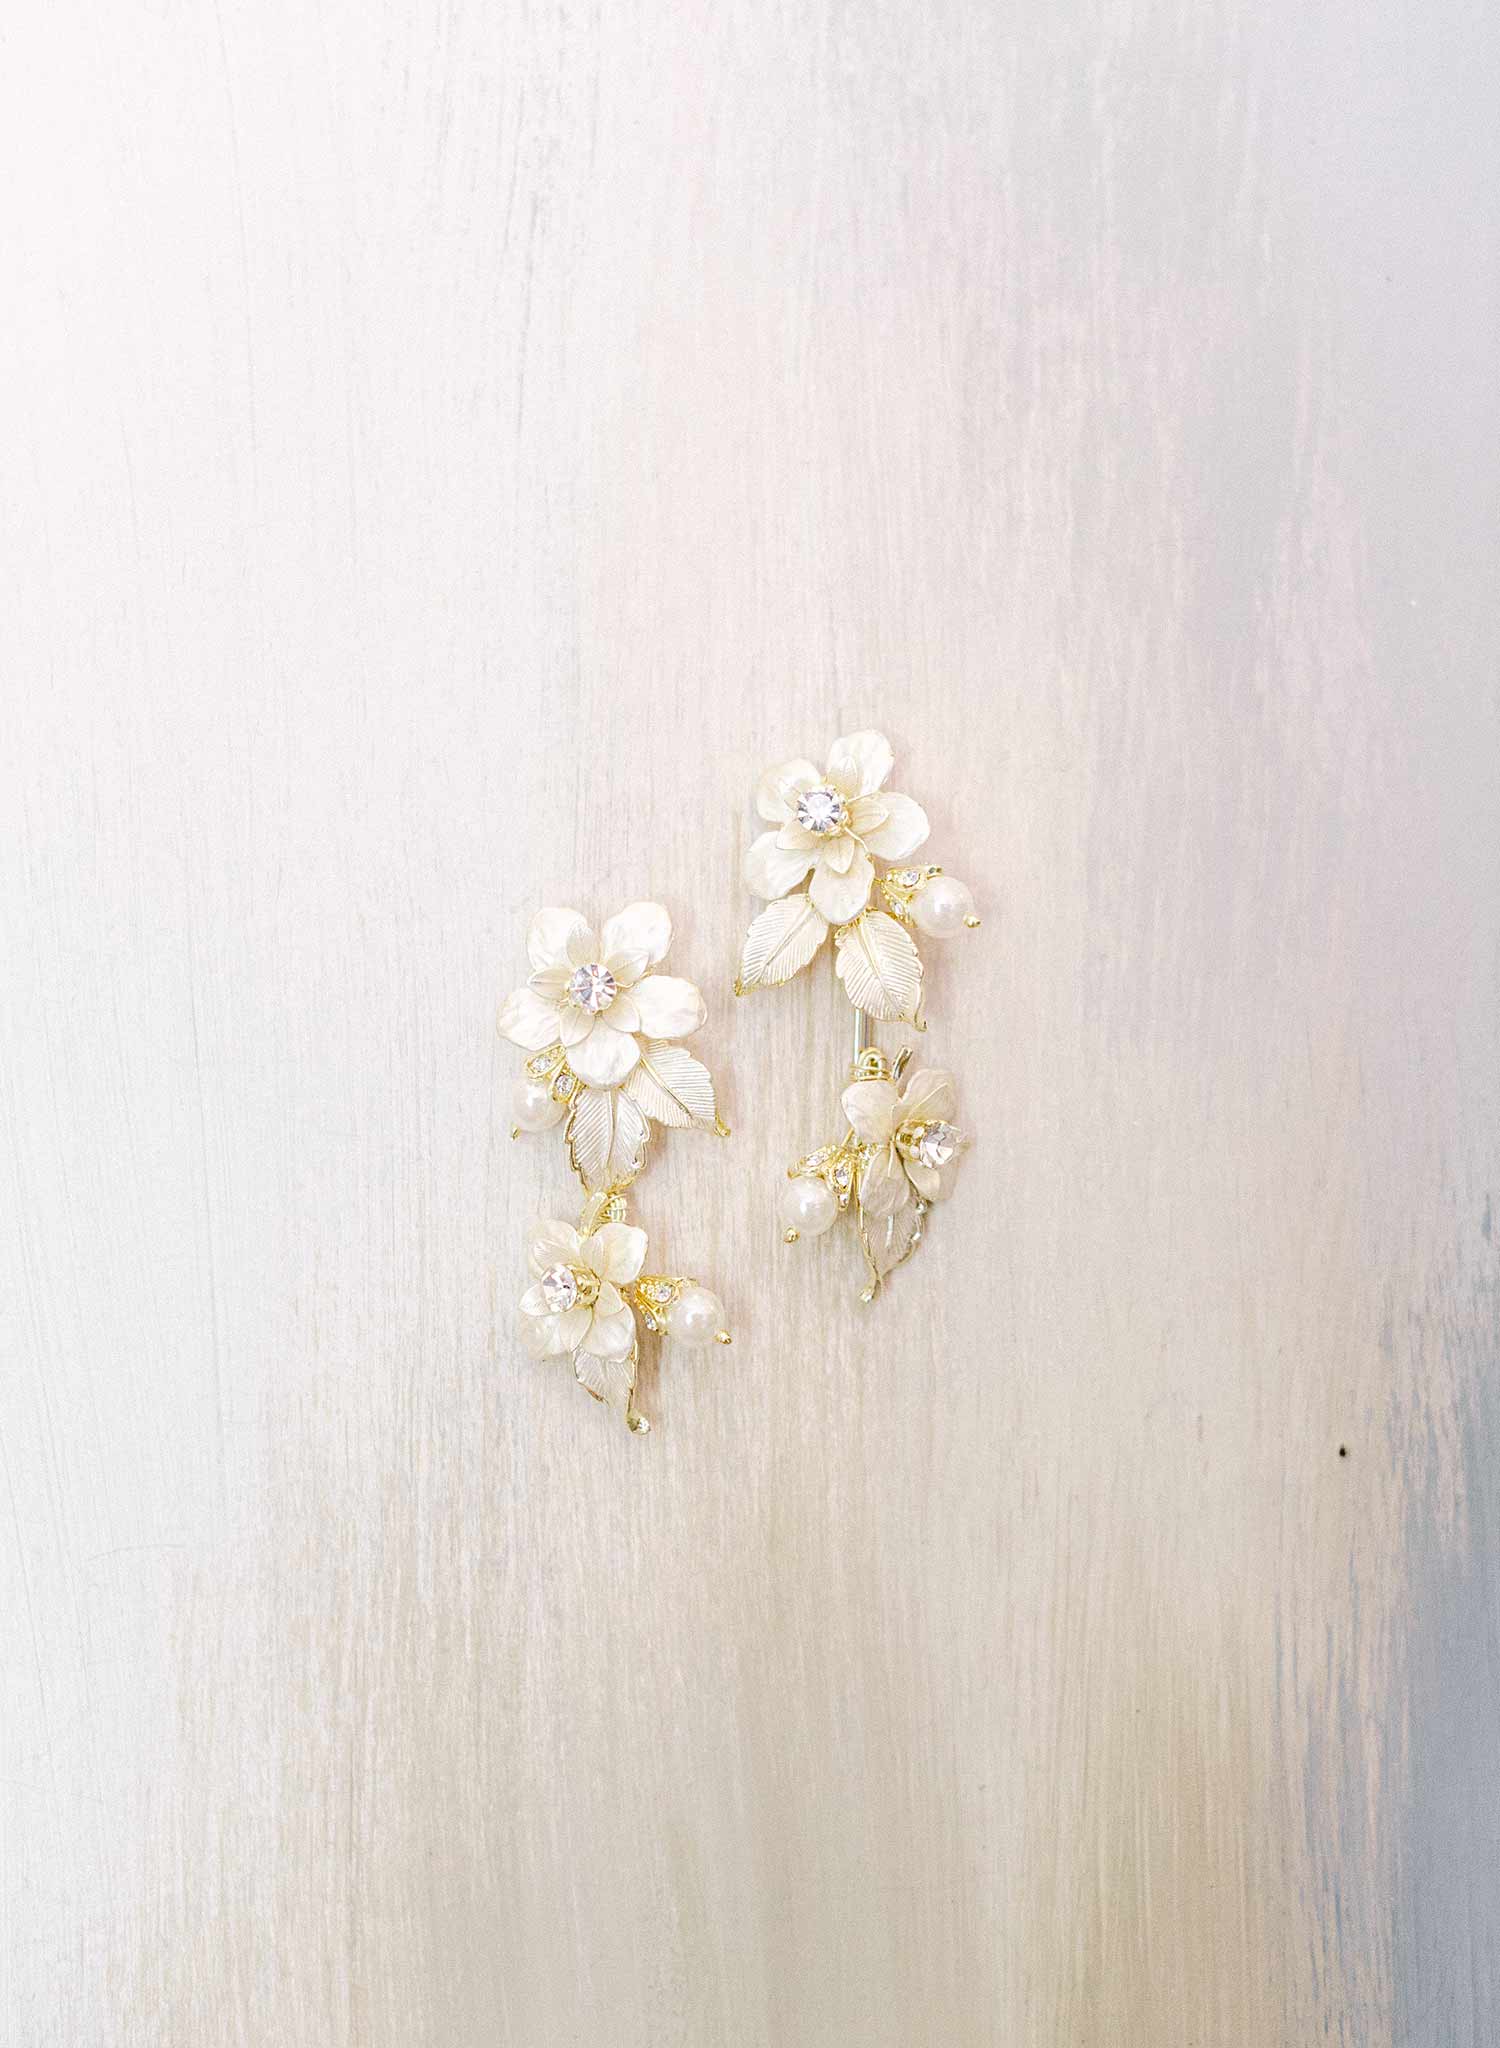 Rose and leaf modern floral earrings - Style #2300